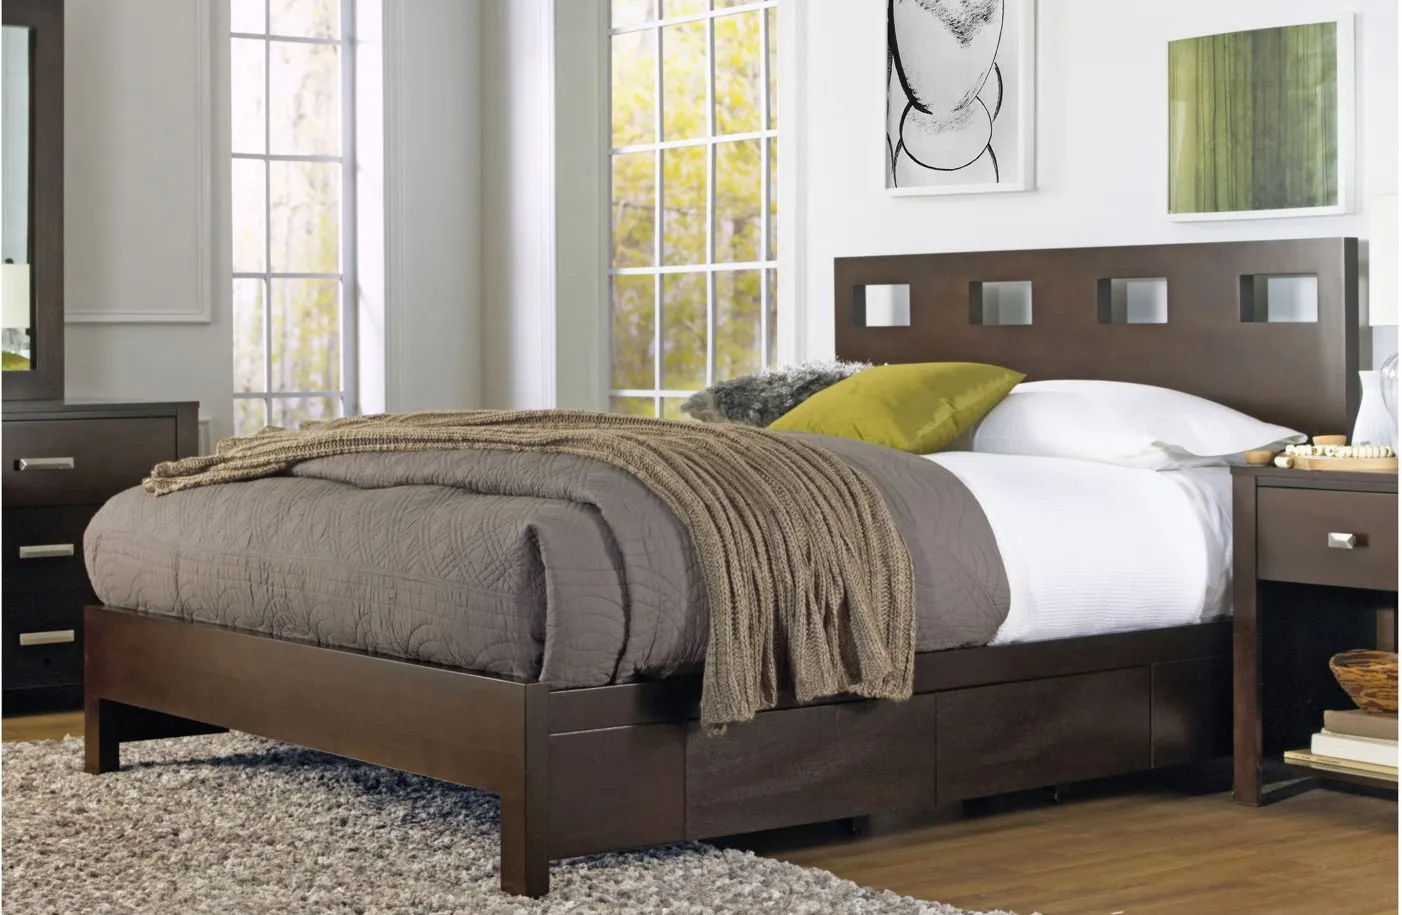 Riva Storage Bed in Chocolate Brown by Bellanest